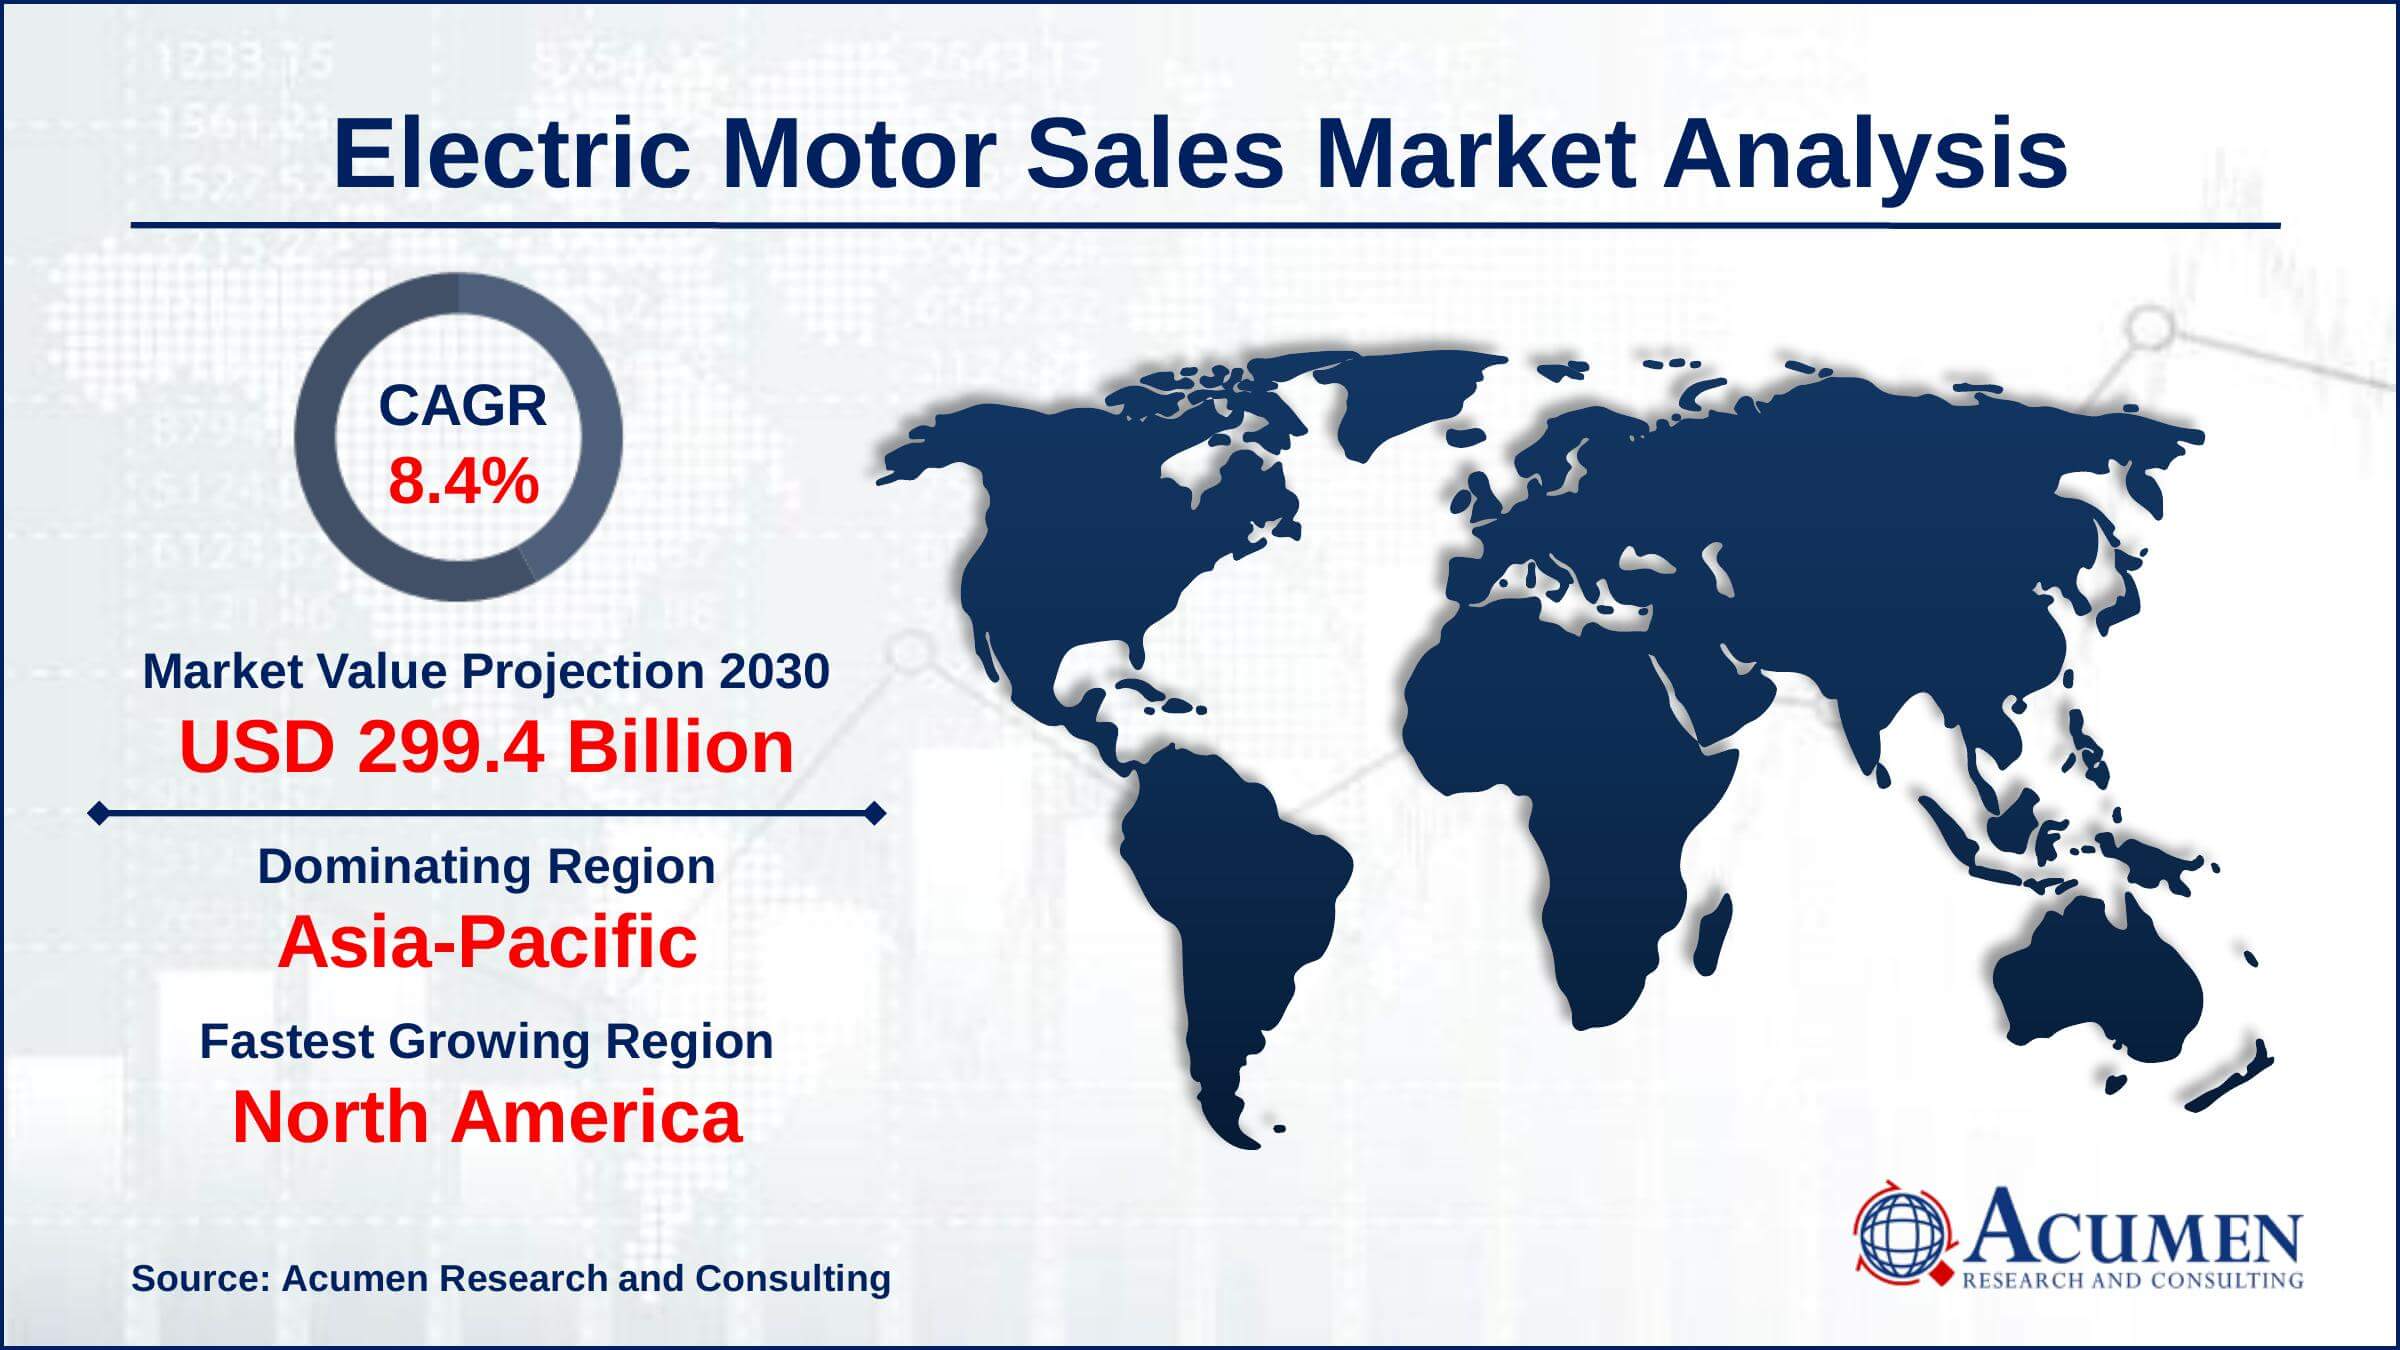 North America and Europe electric motor market growth will observe strongest CAGR from 2022 to 2030